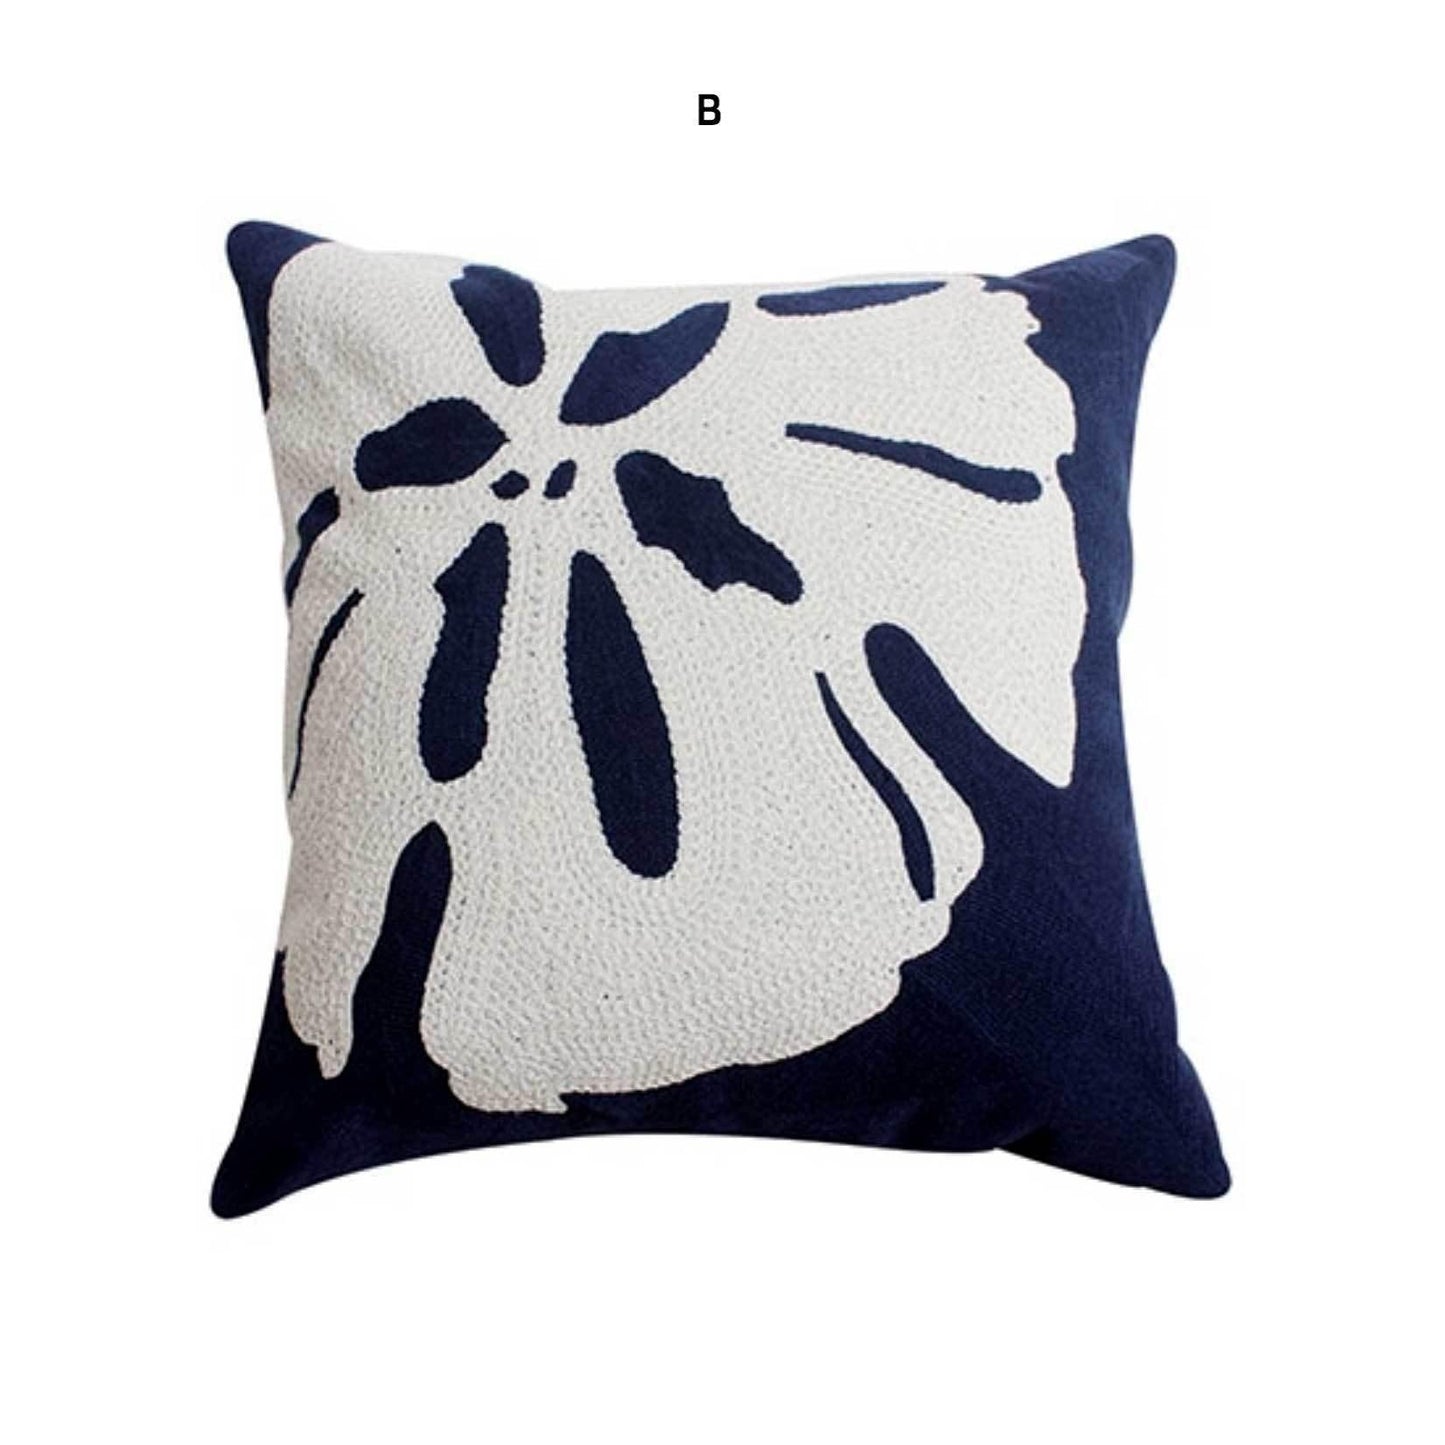 Embroidered Marine Cushions - Nordic Side - 